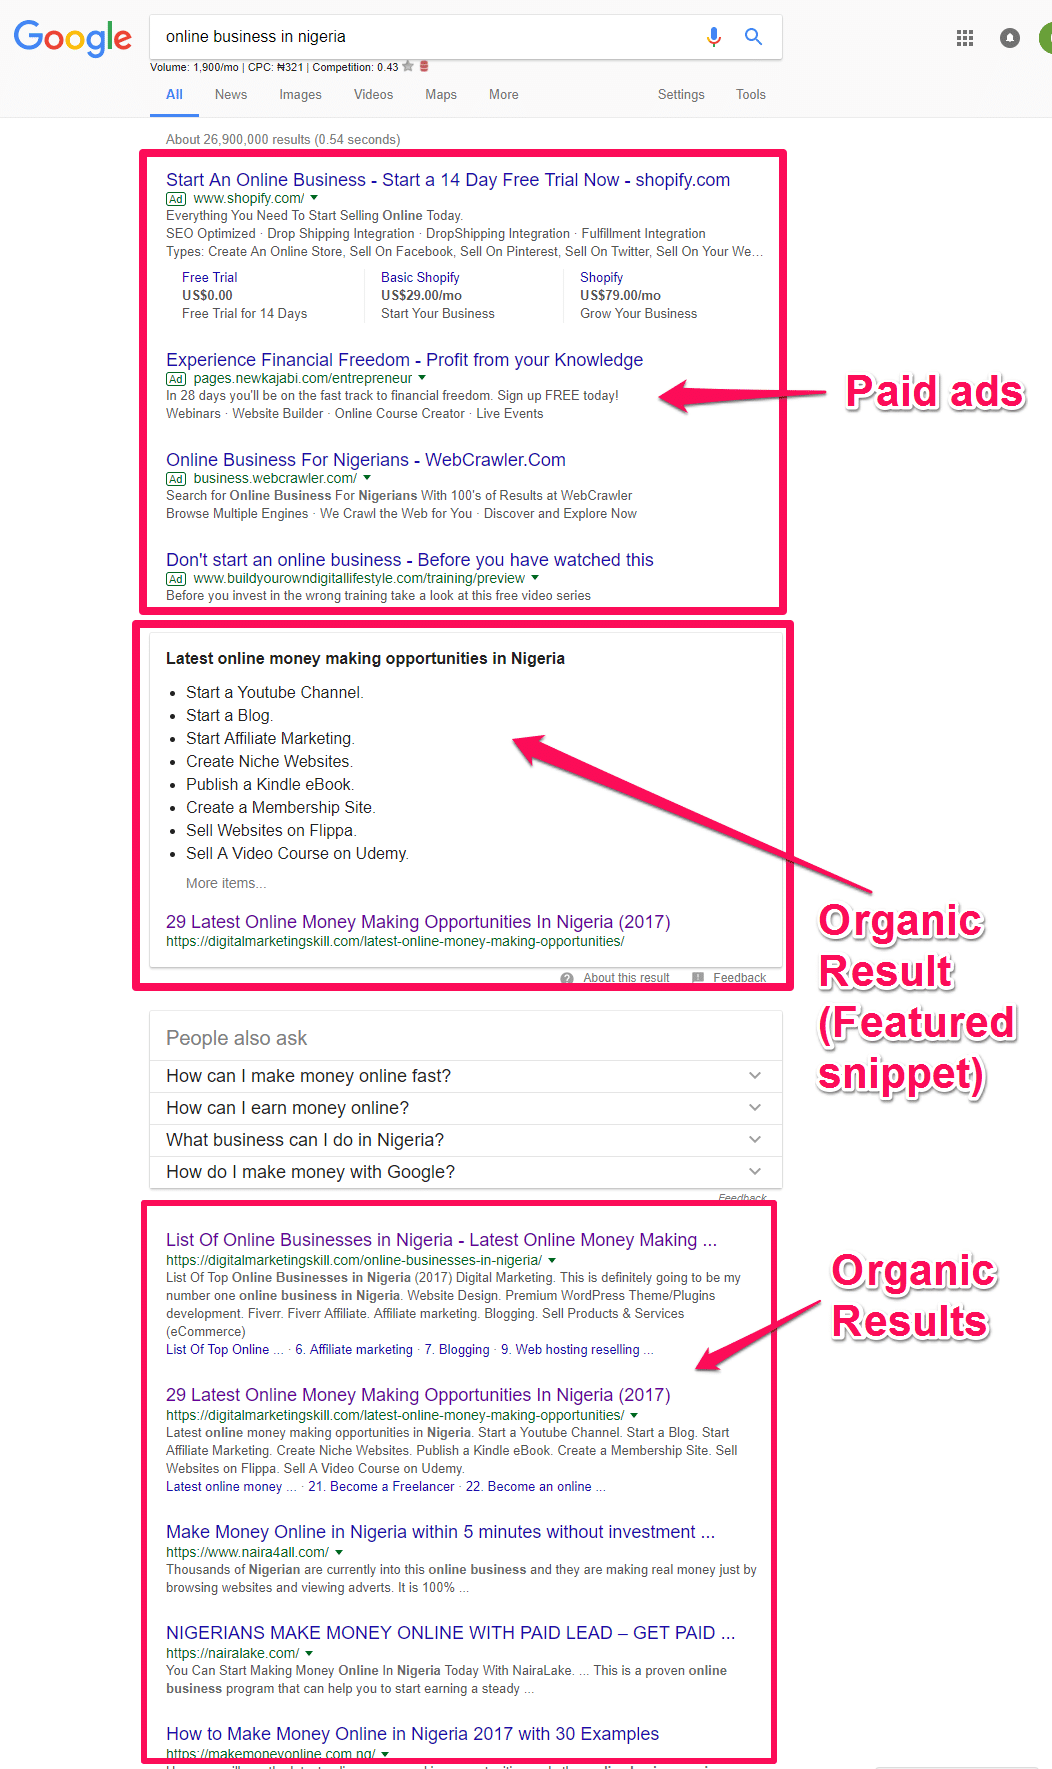 ORGANIC VS PAID ADS RESULTS EXPLAINED